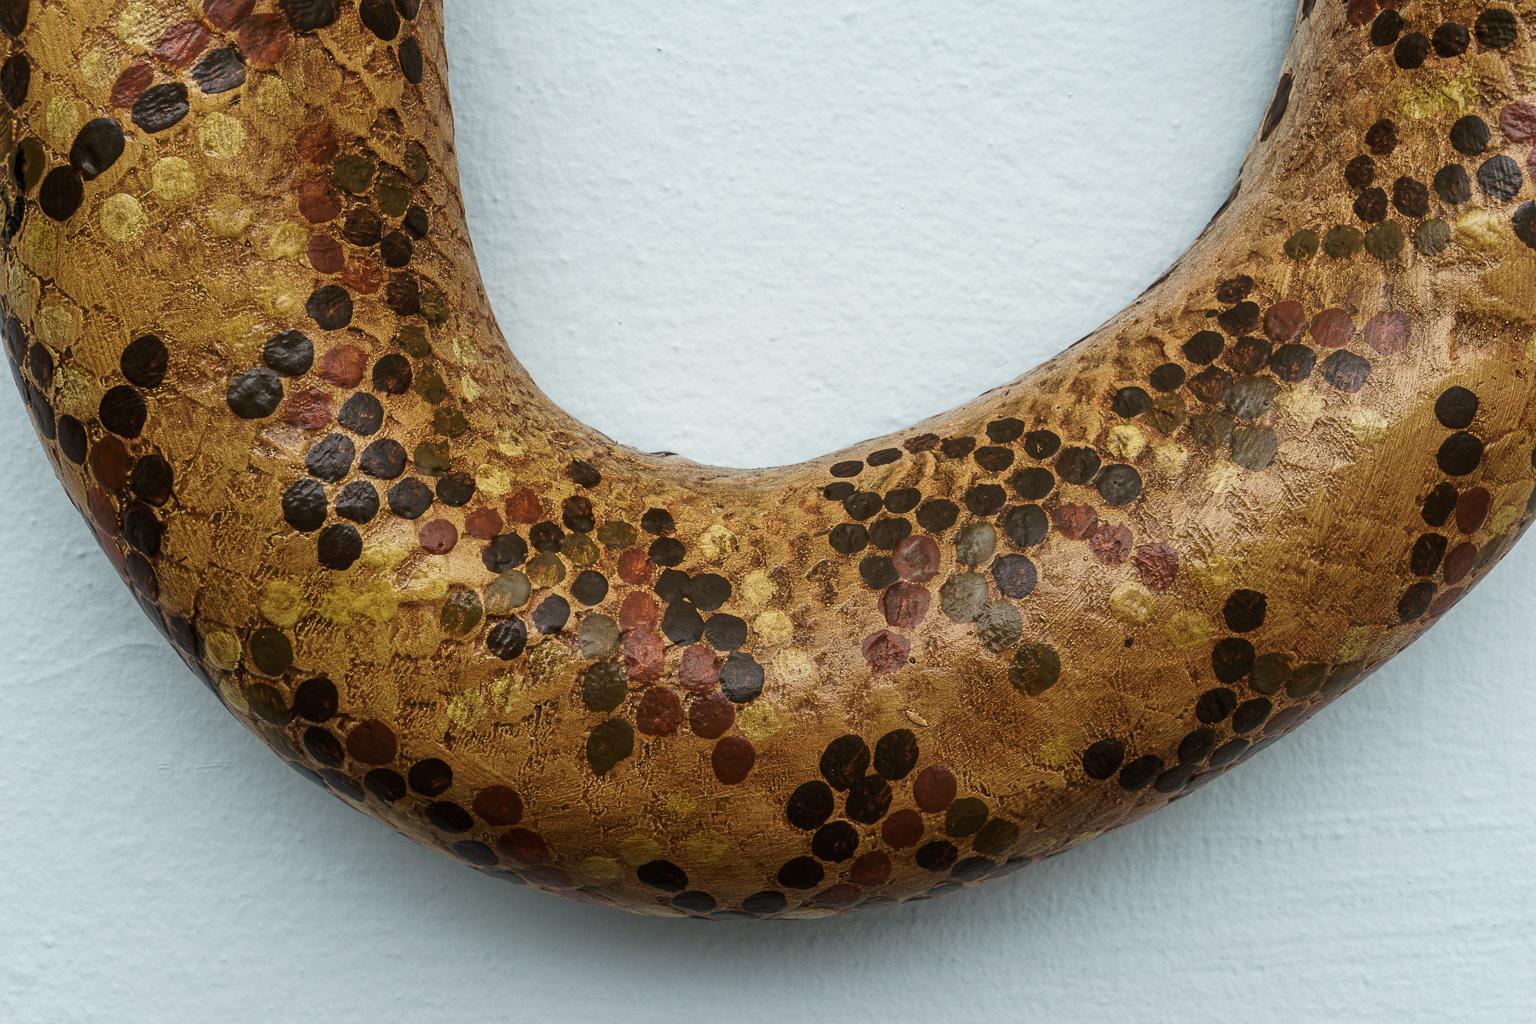 Resin Large Scale Sculpture of a Boa Constrictor